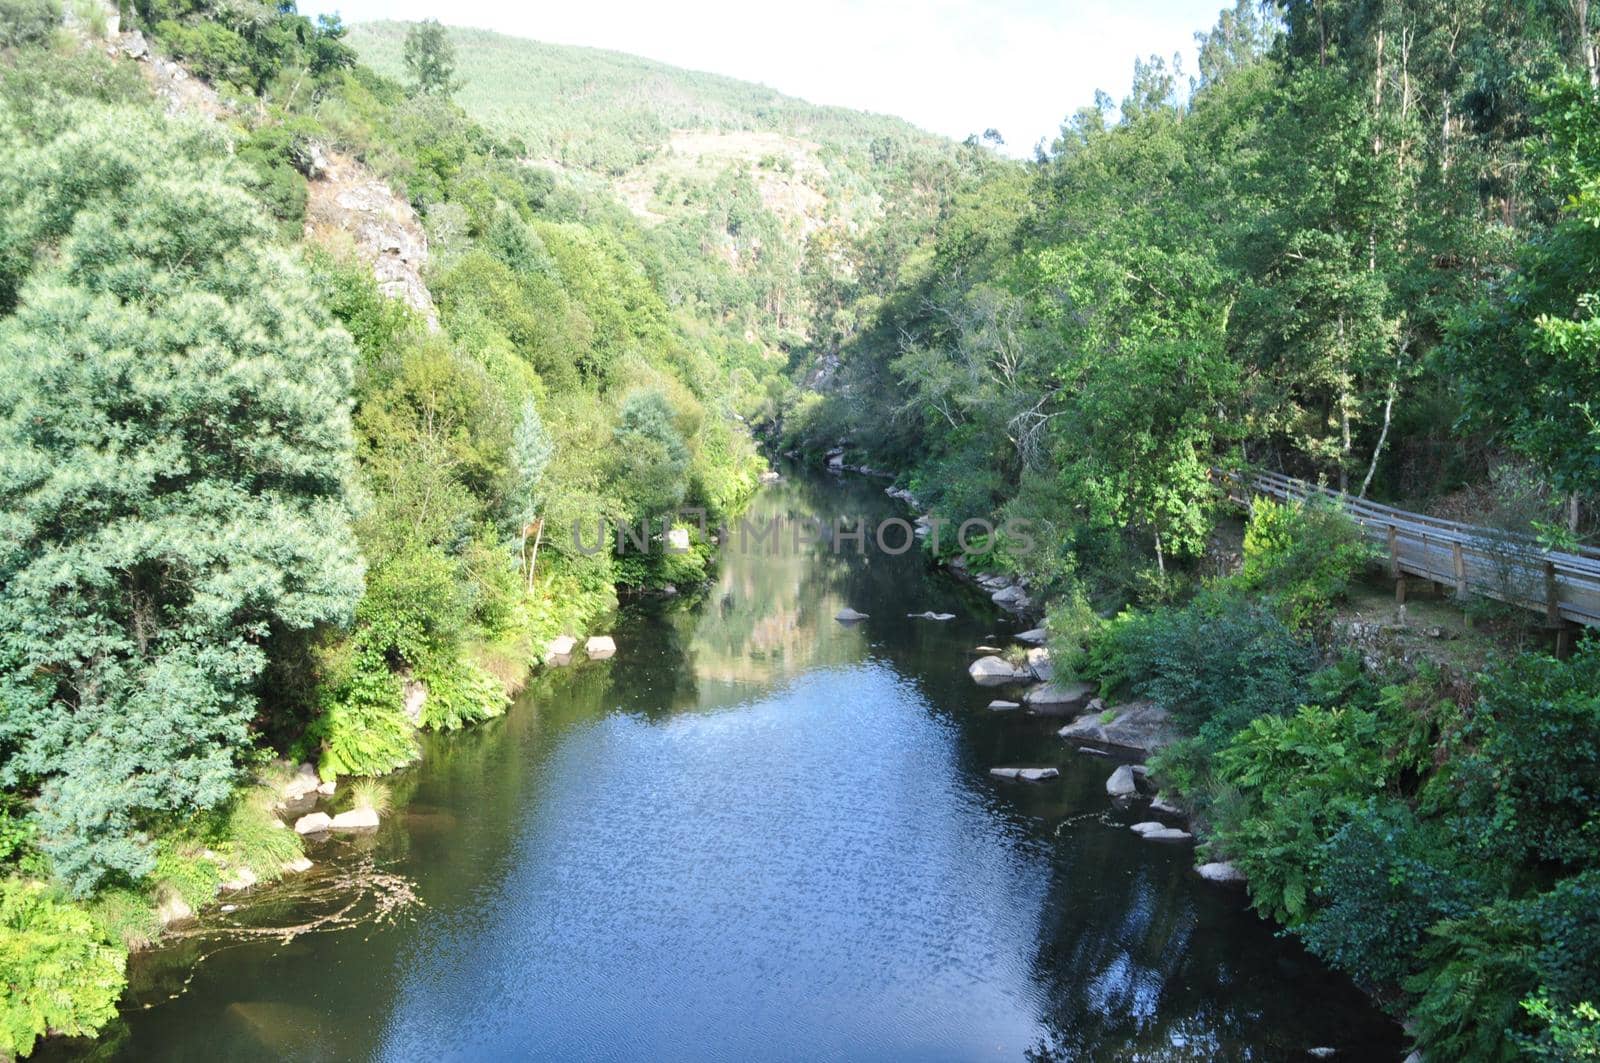 View on the river Paiva, Portugal.